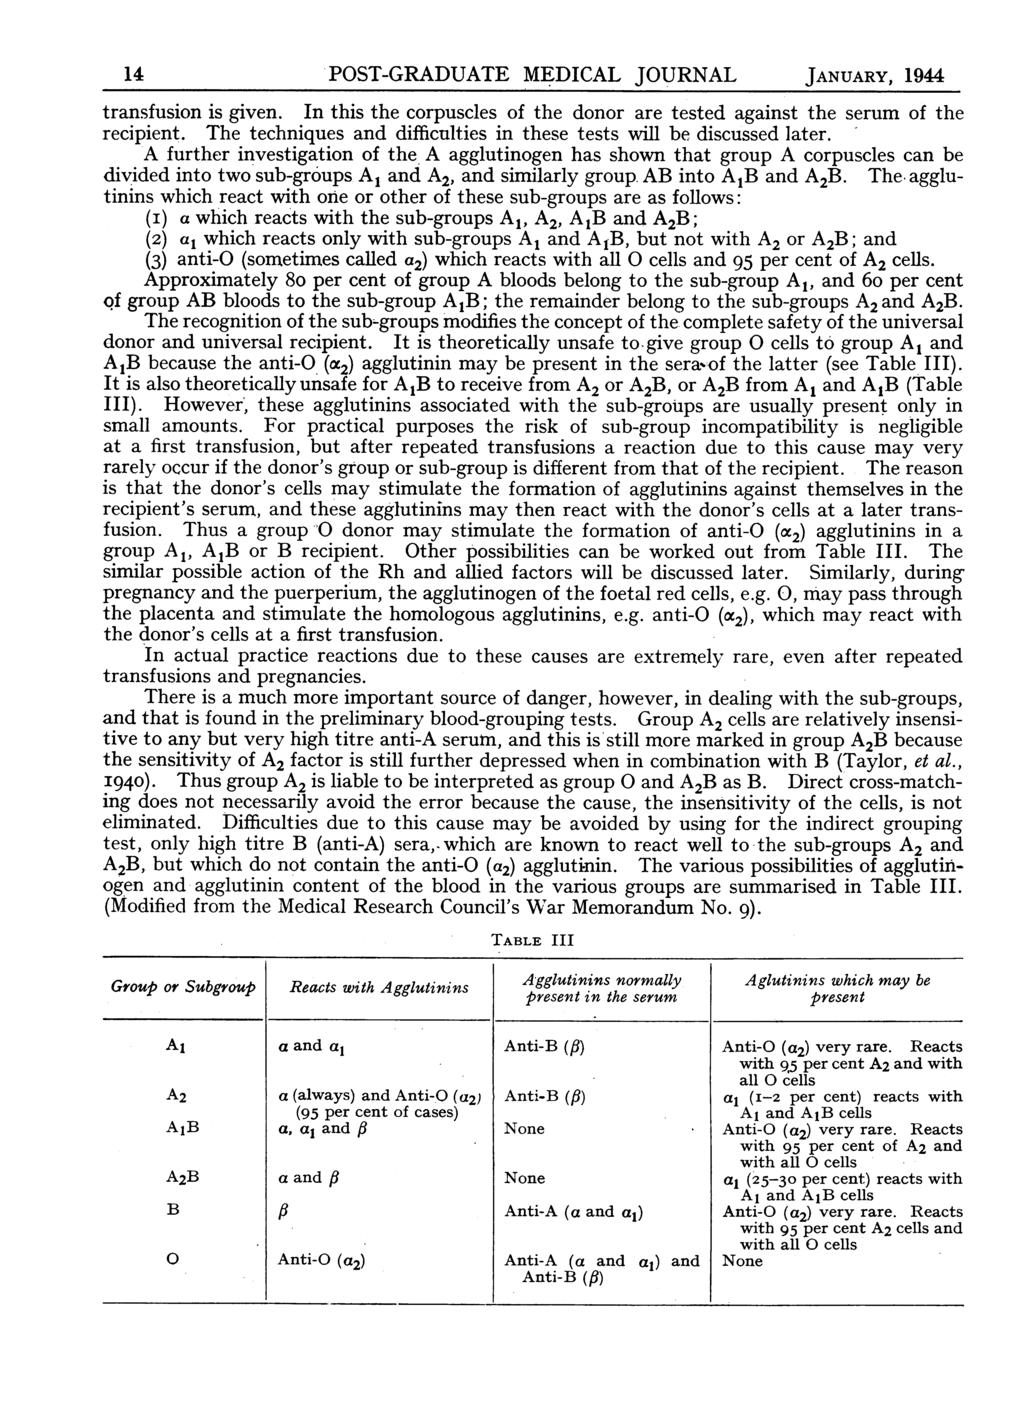 14.POST-GRADUATE MEDICAL JOURNAL JANUARY, 1944 transfusion is given. In this the corpuscles of the donor are tested against the serum of the recipient.